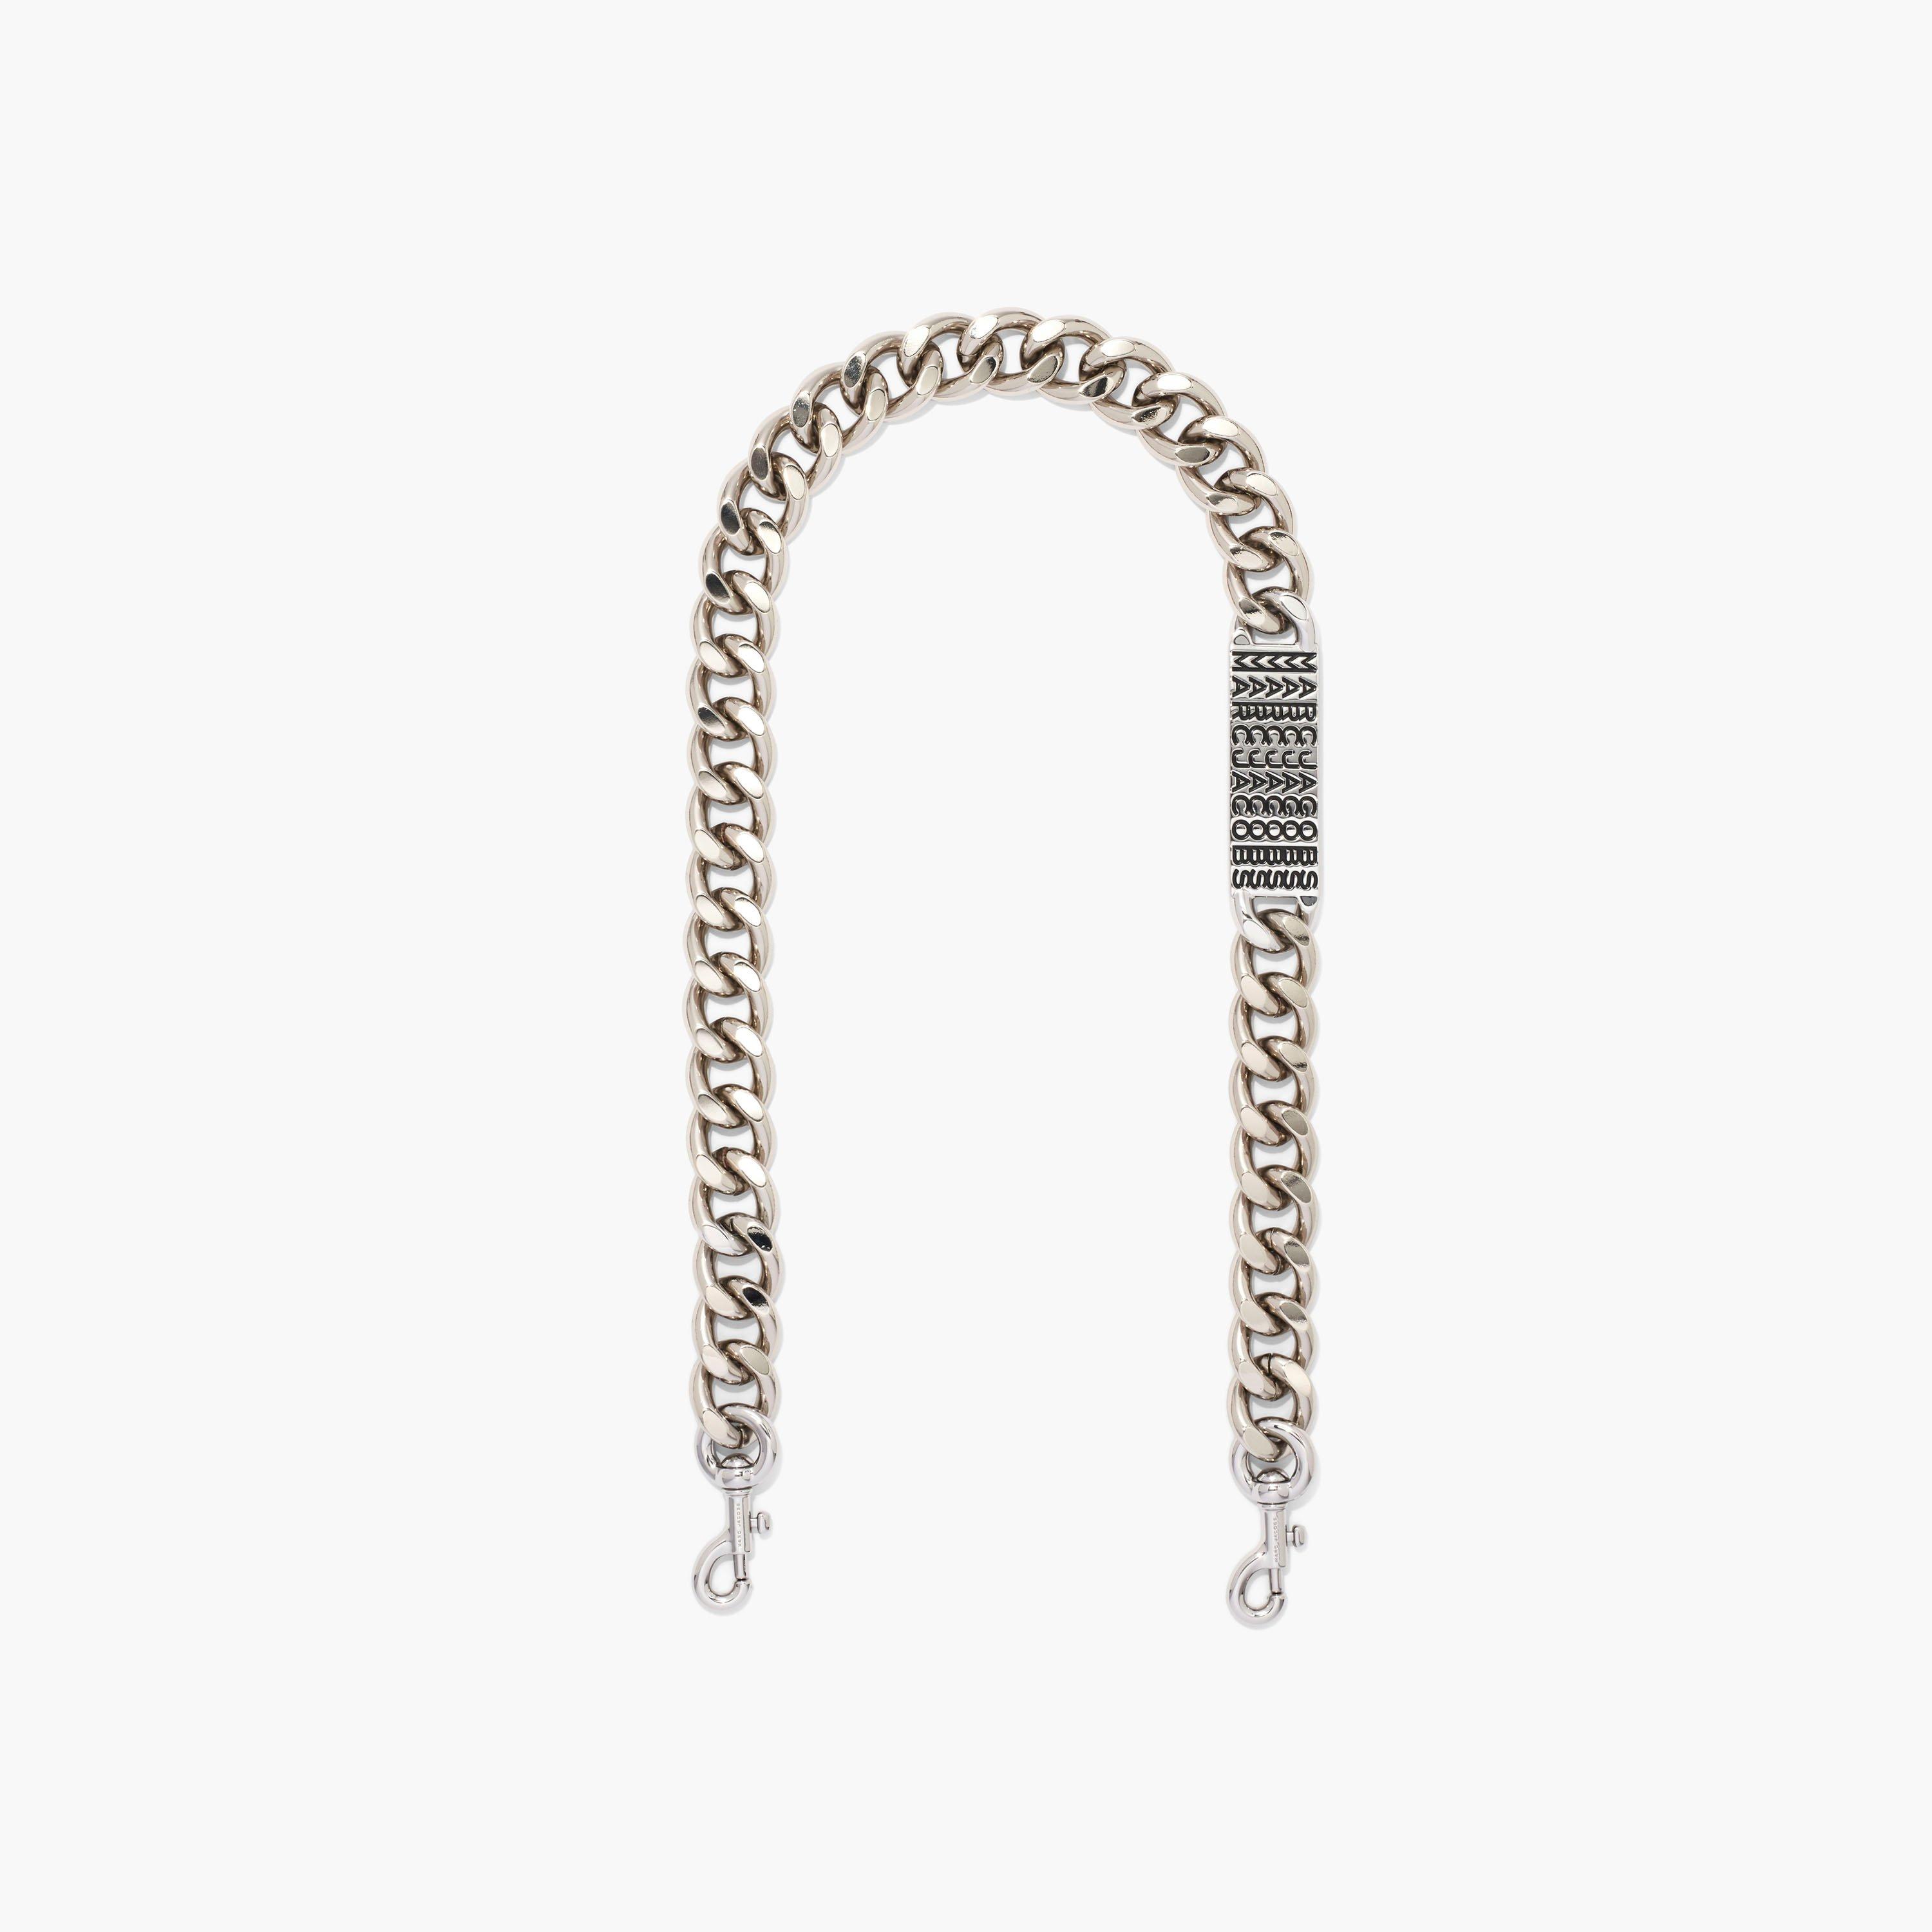 Marc by Marc jacobs The Barcode Chain Shoulder Strap,NICKEL